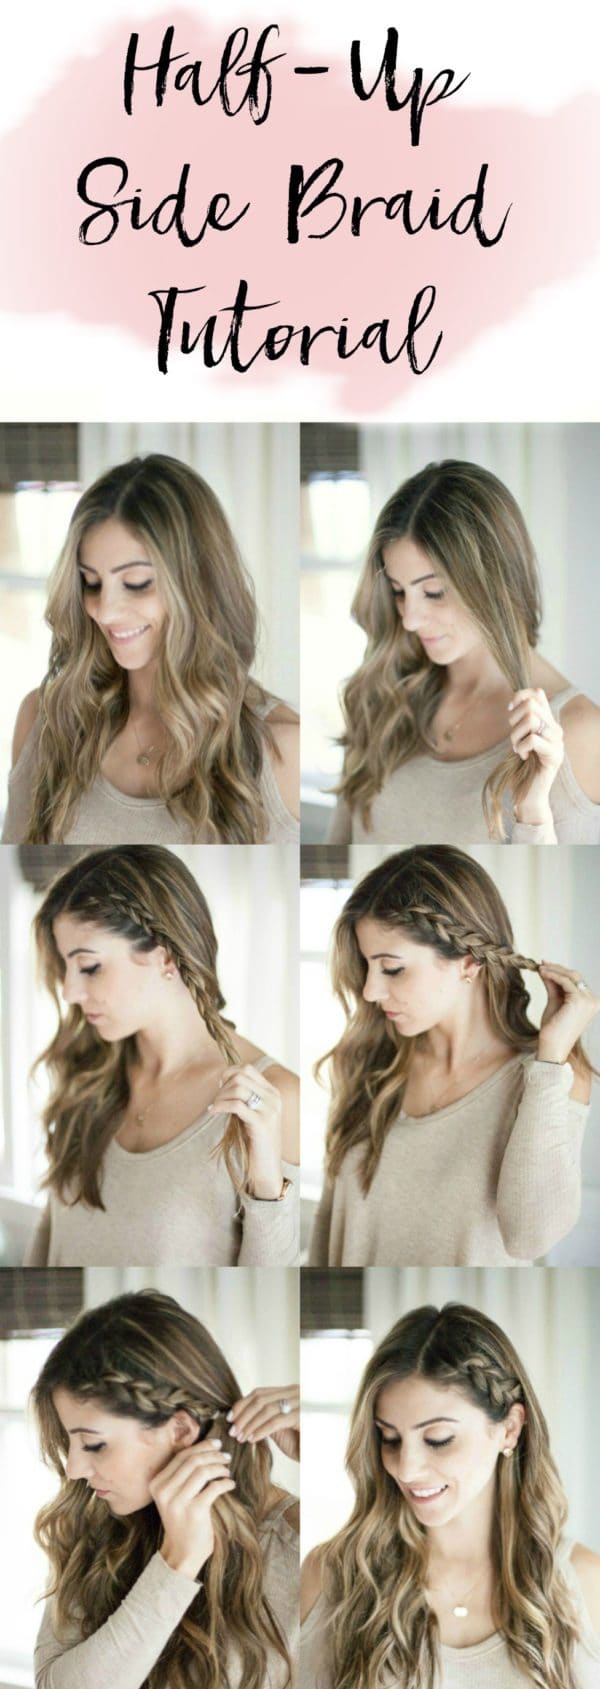 10 Elegant Hairstyles Tutorials That You Will Adore This Summer